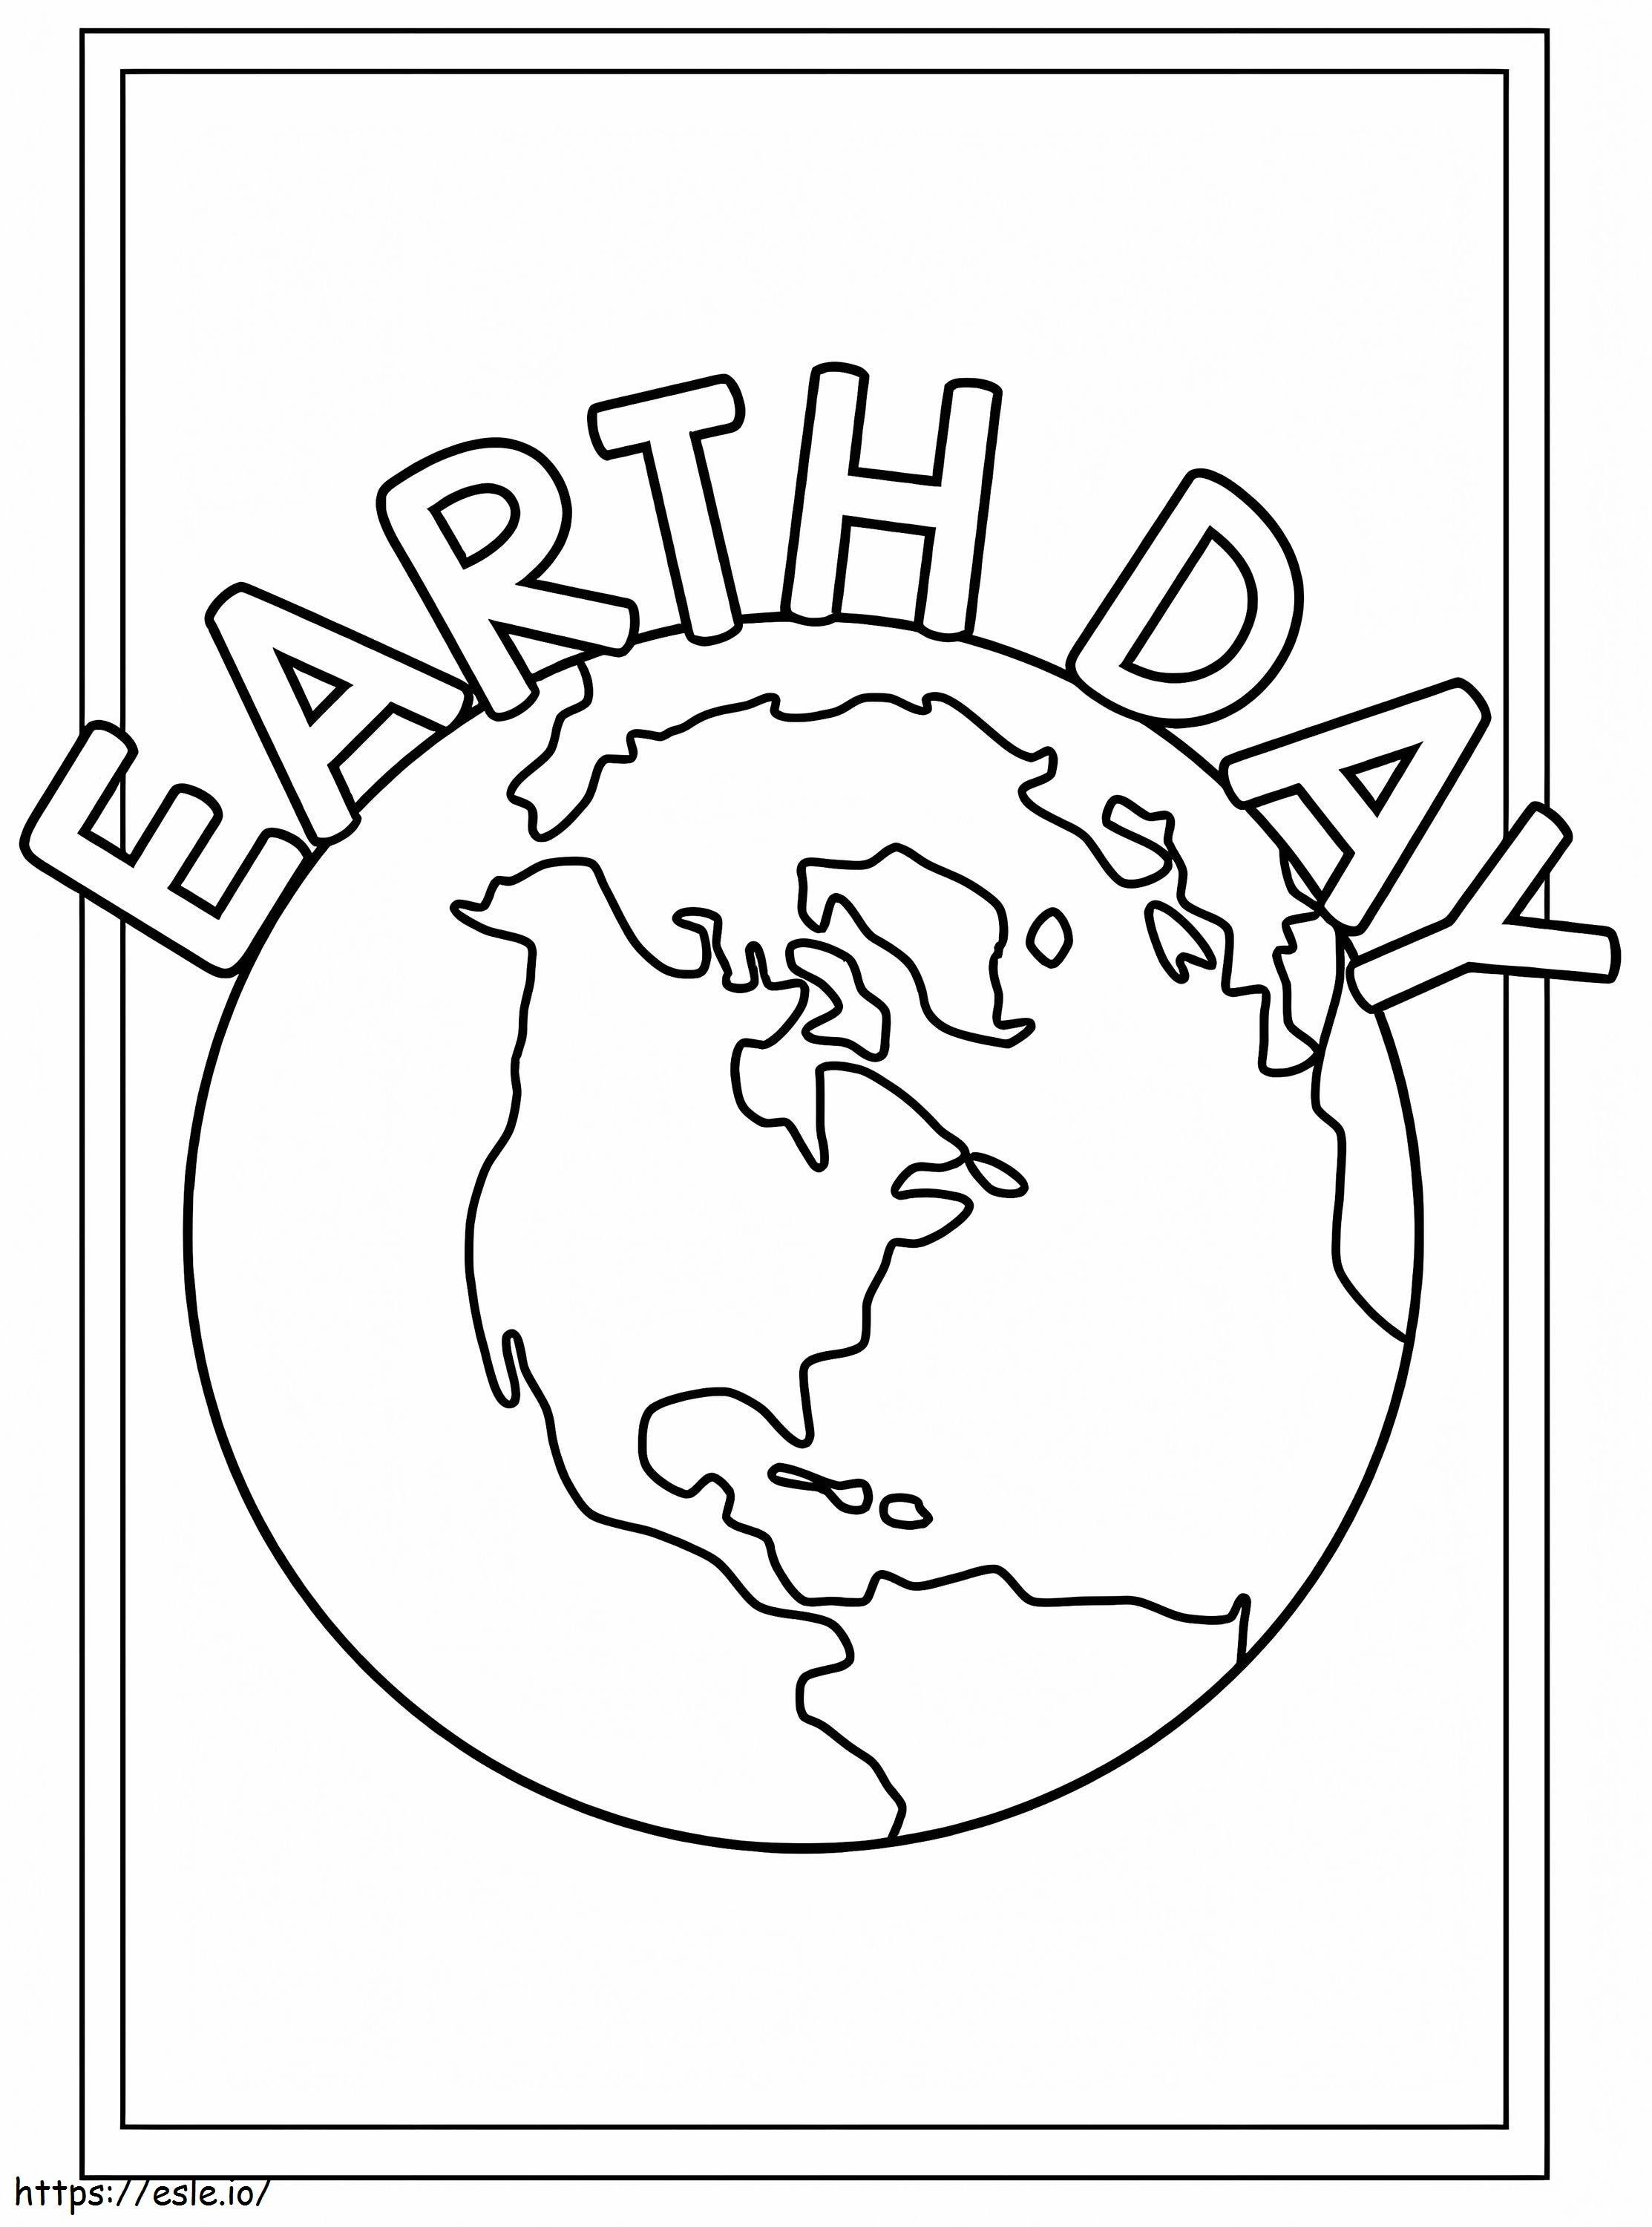 Earth Day With Earth coloring page